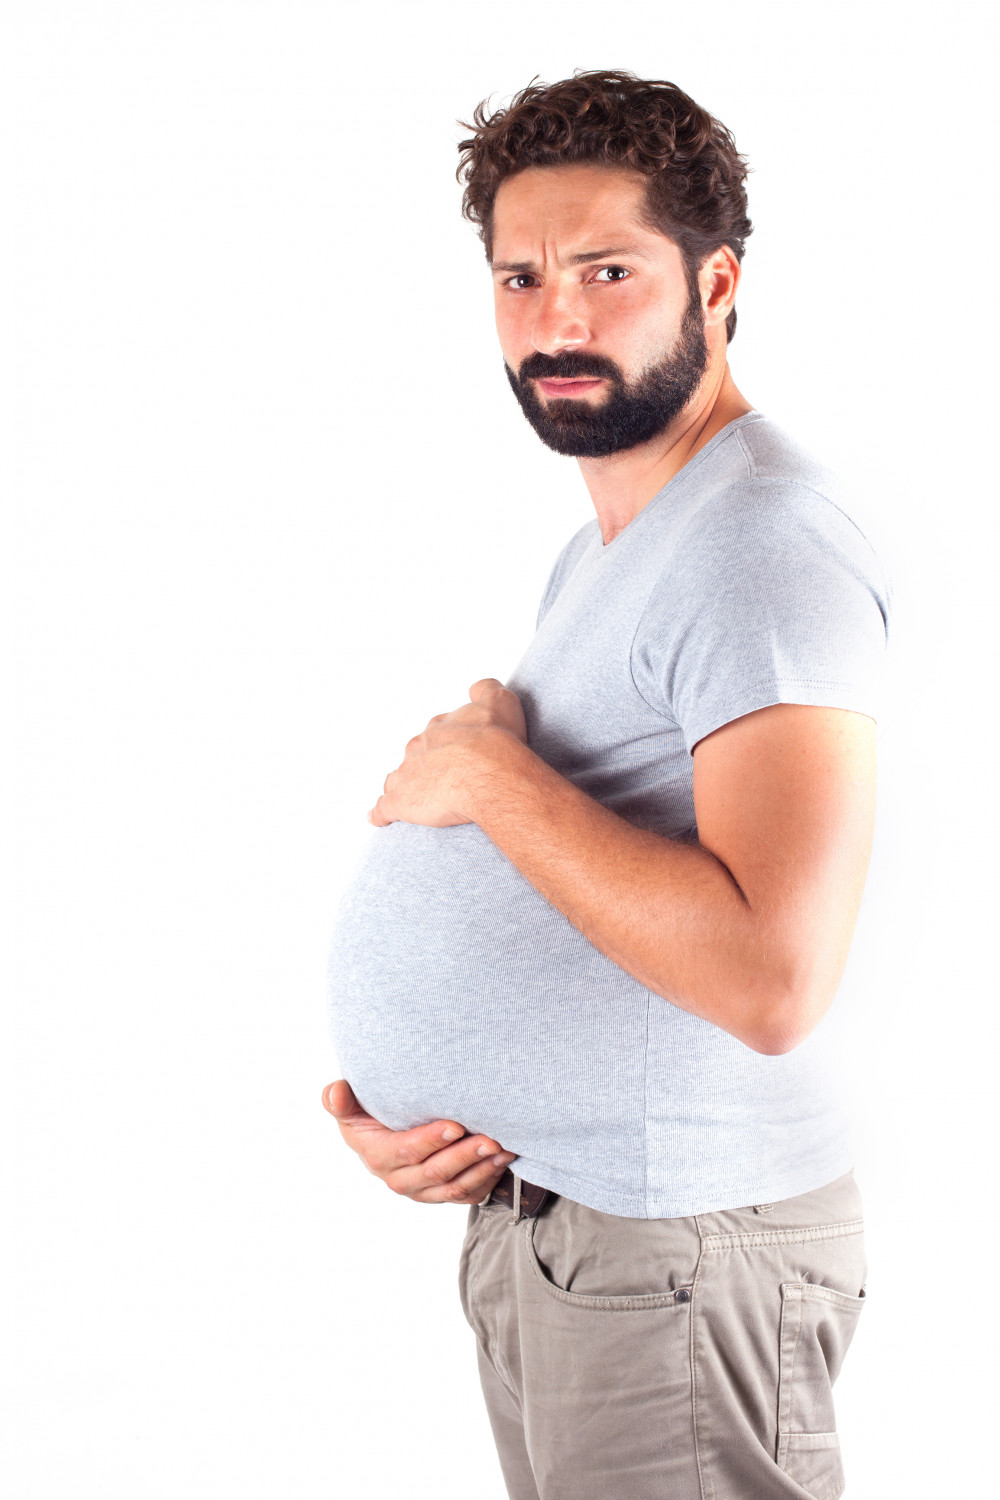 Pictures Of The Pregnant Man 52